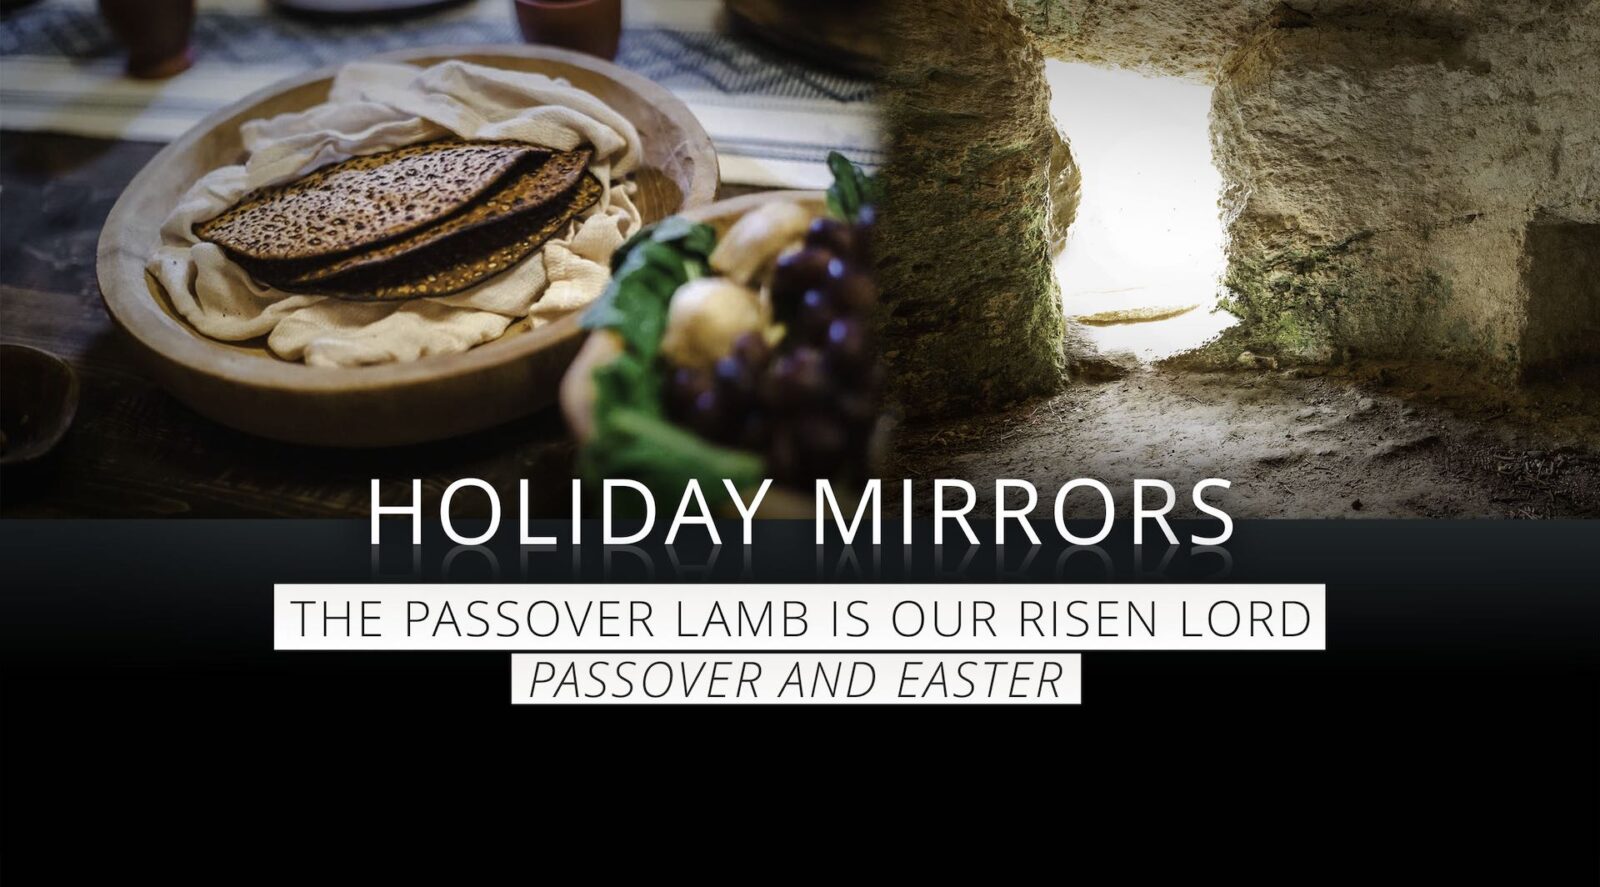 Passover and Risen Lord at Easter